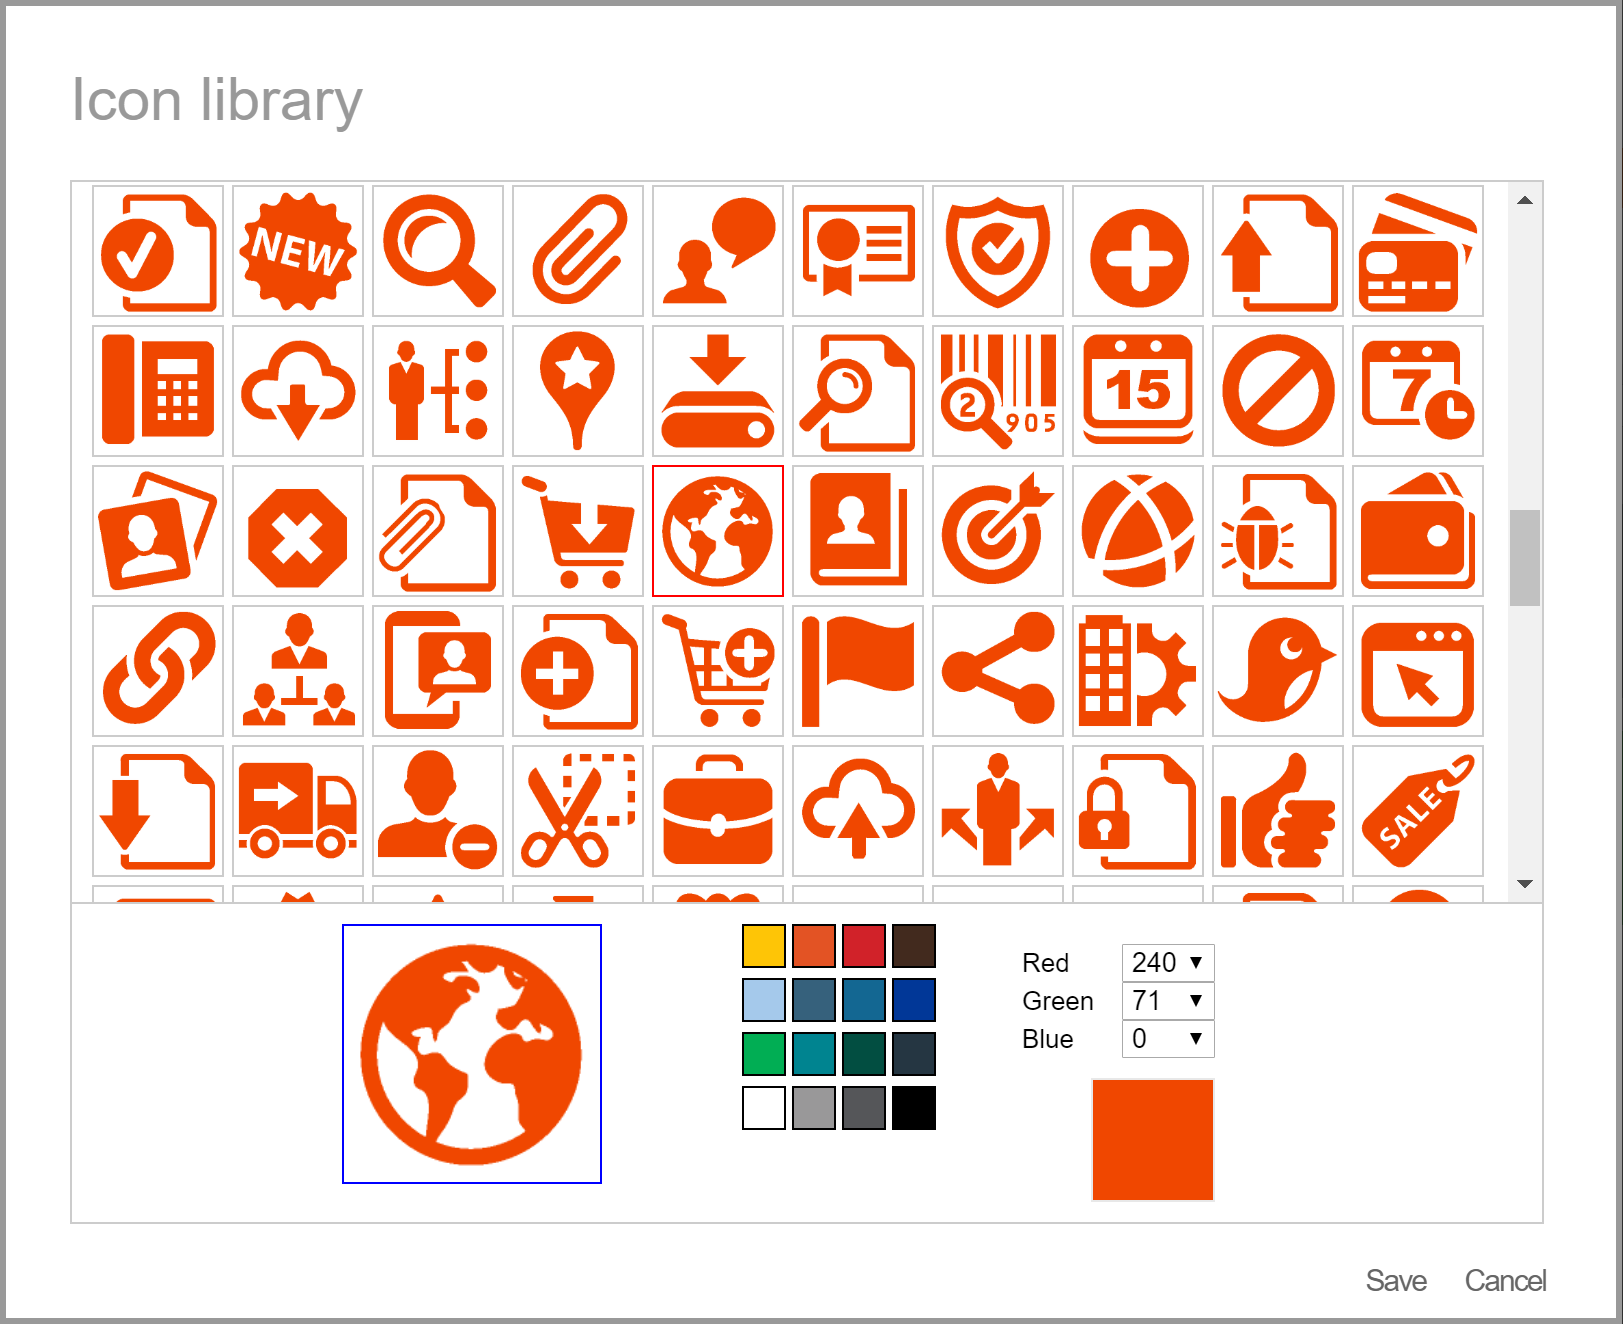 Icon_library.PNG